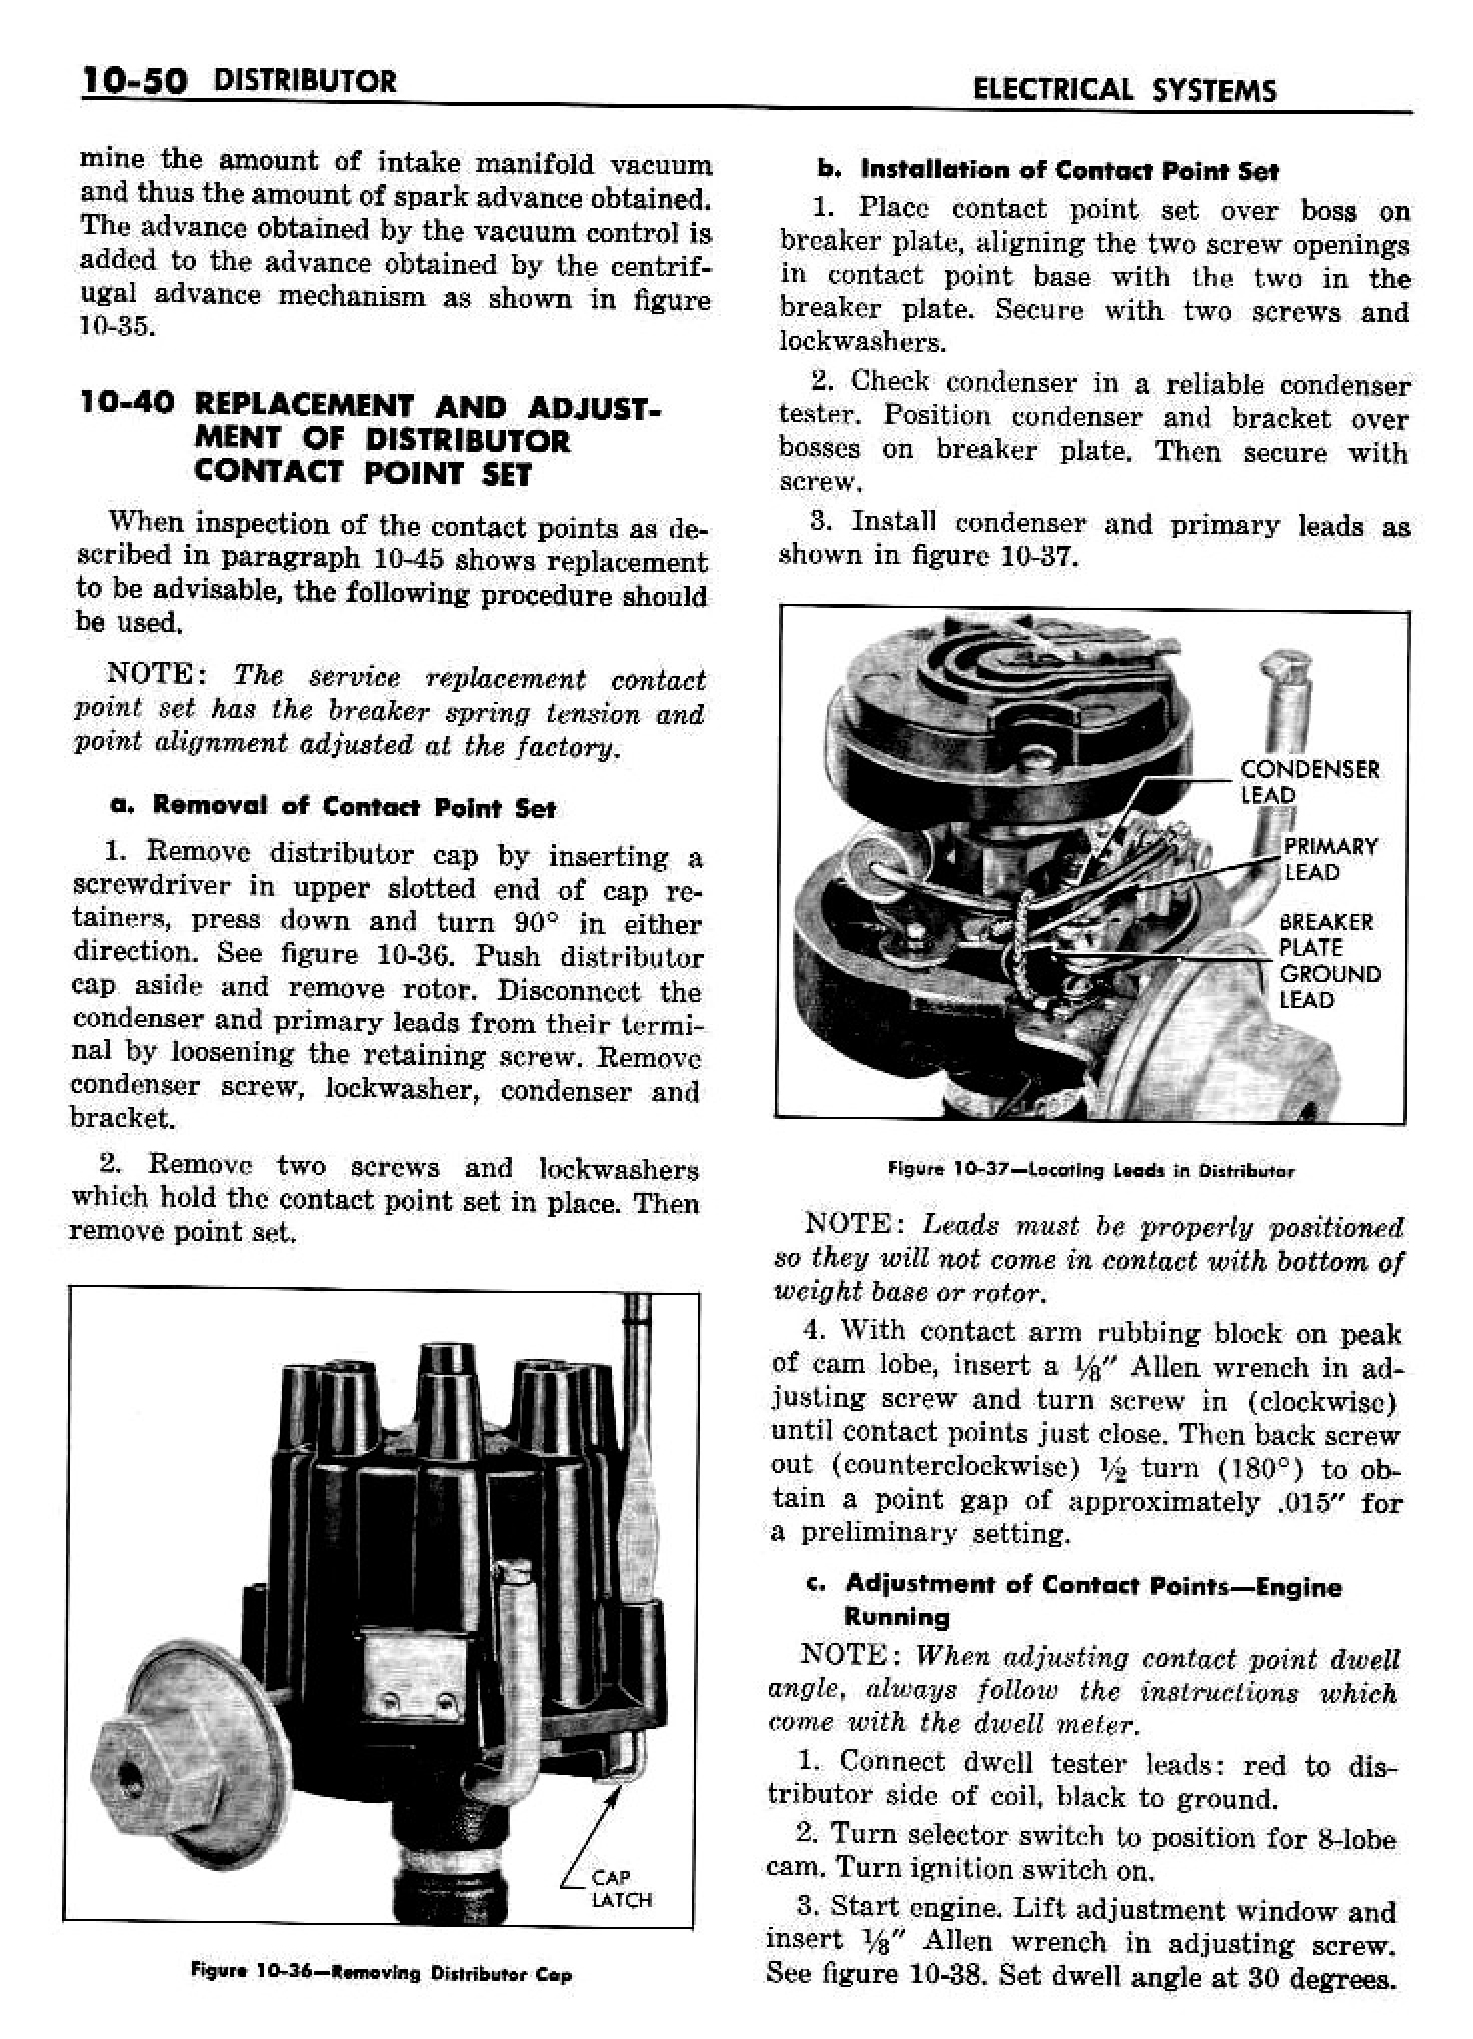 n_11 1958 Buick Shop Manual - Electrical Systems_50.jpg